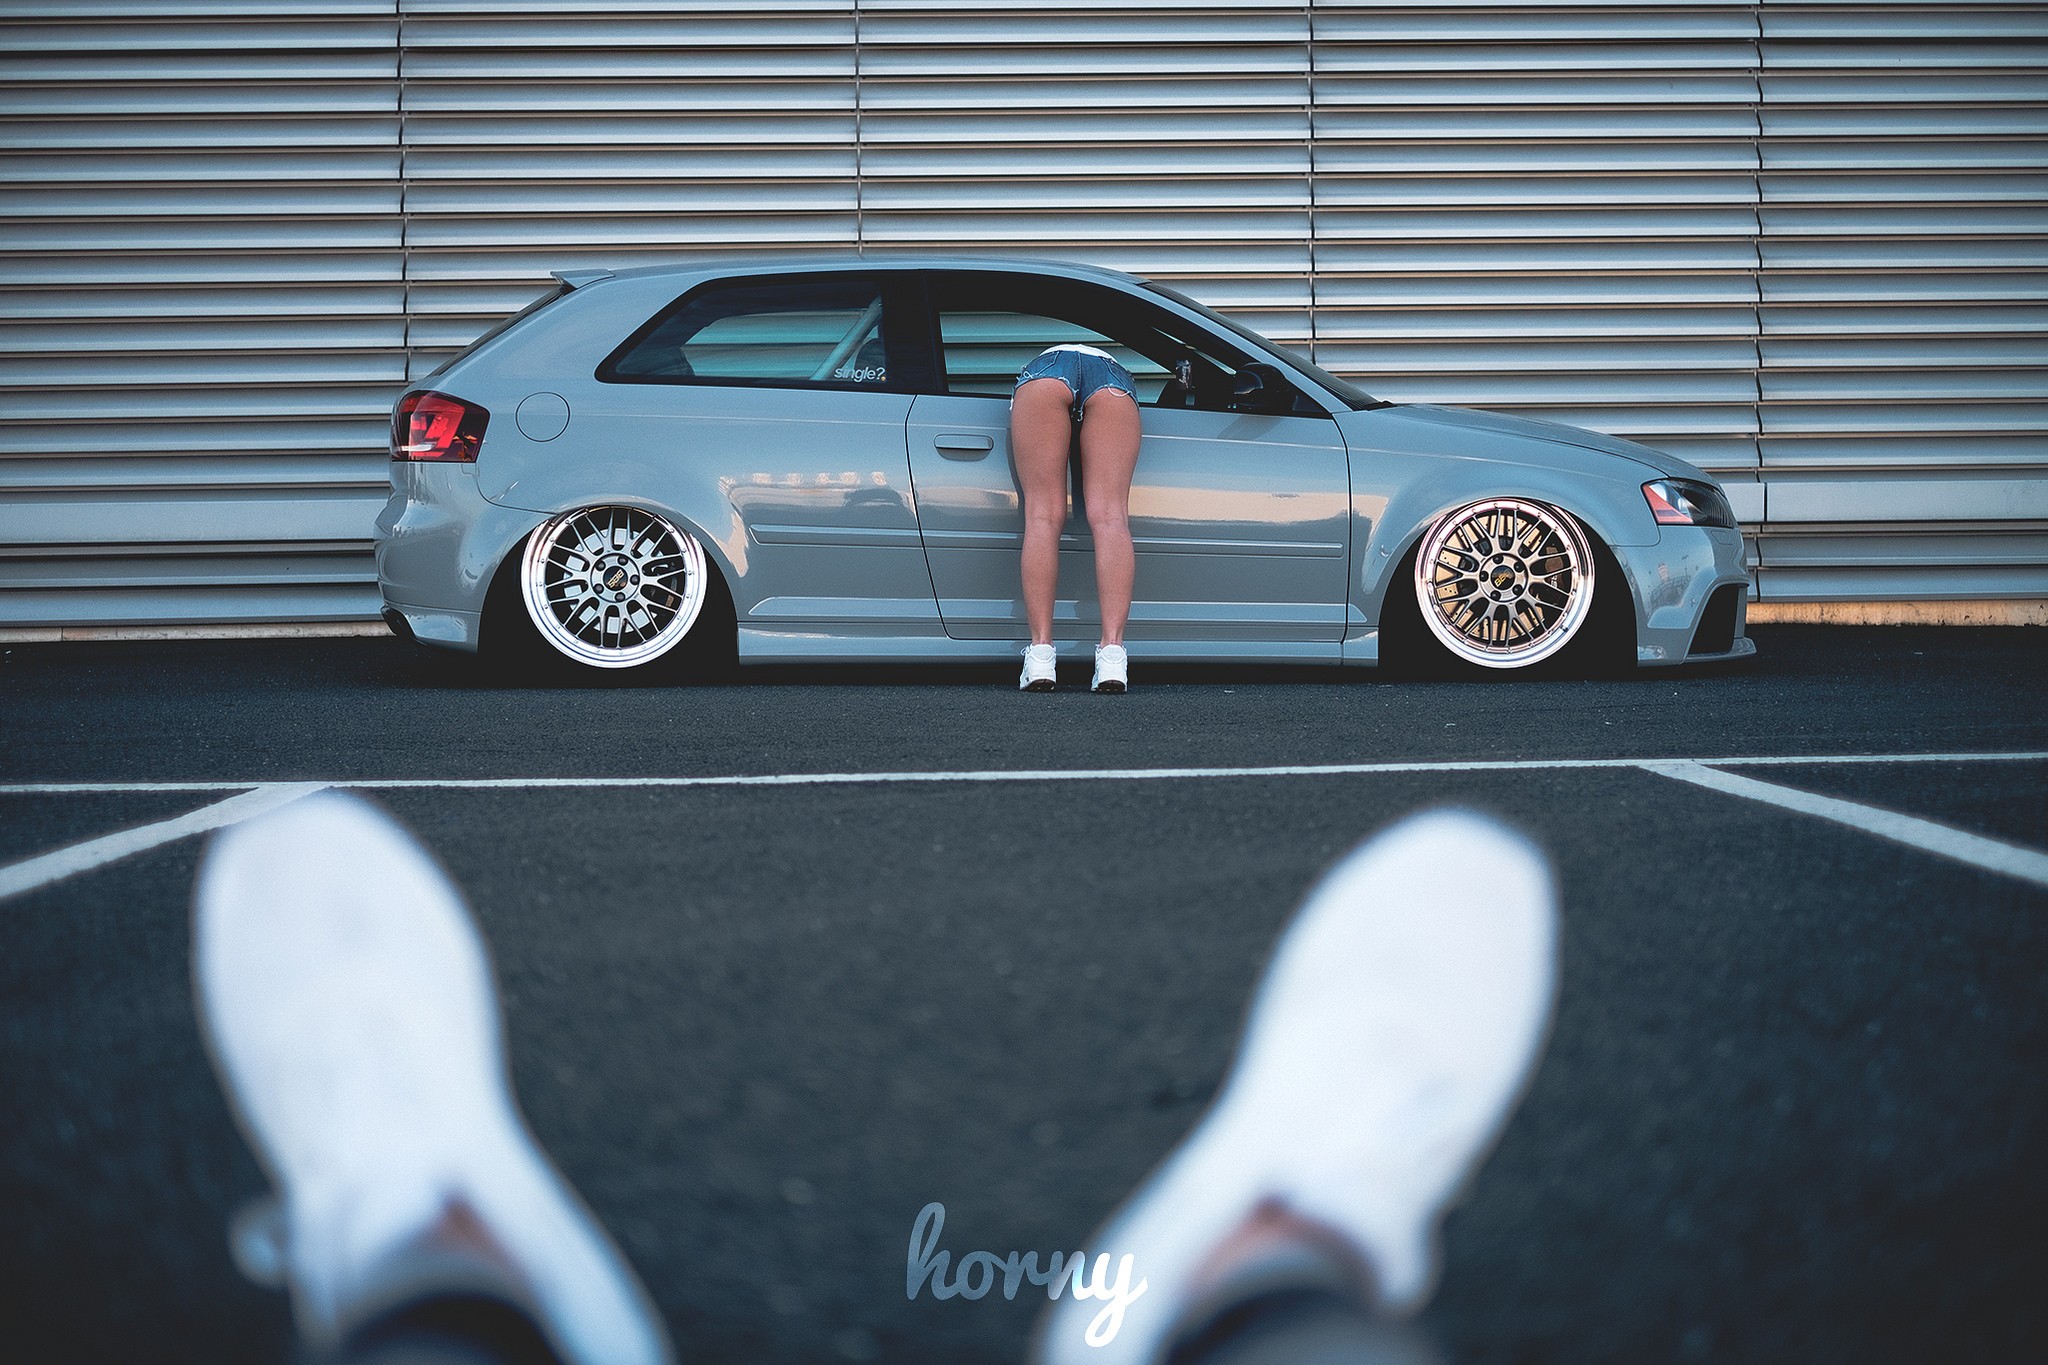 People 2048x1365 women ass jean shorts women with cars back sneakers bent over POV stanced Audi A3 Audi rear view women outdoors shoes white shoes car vehicle short shorts model Daisy Dukes legs